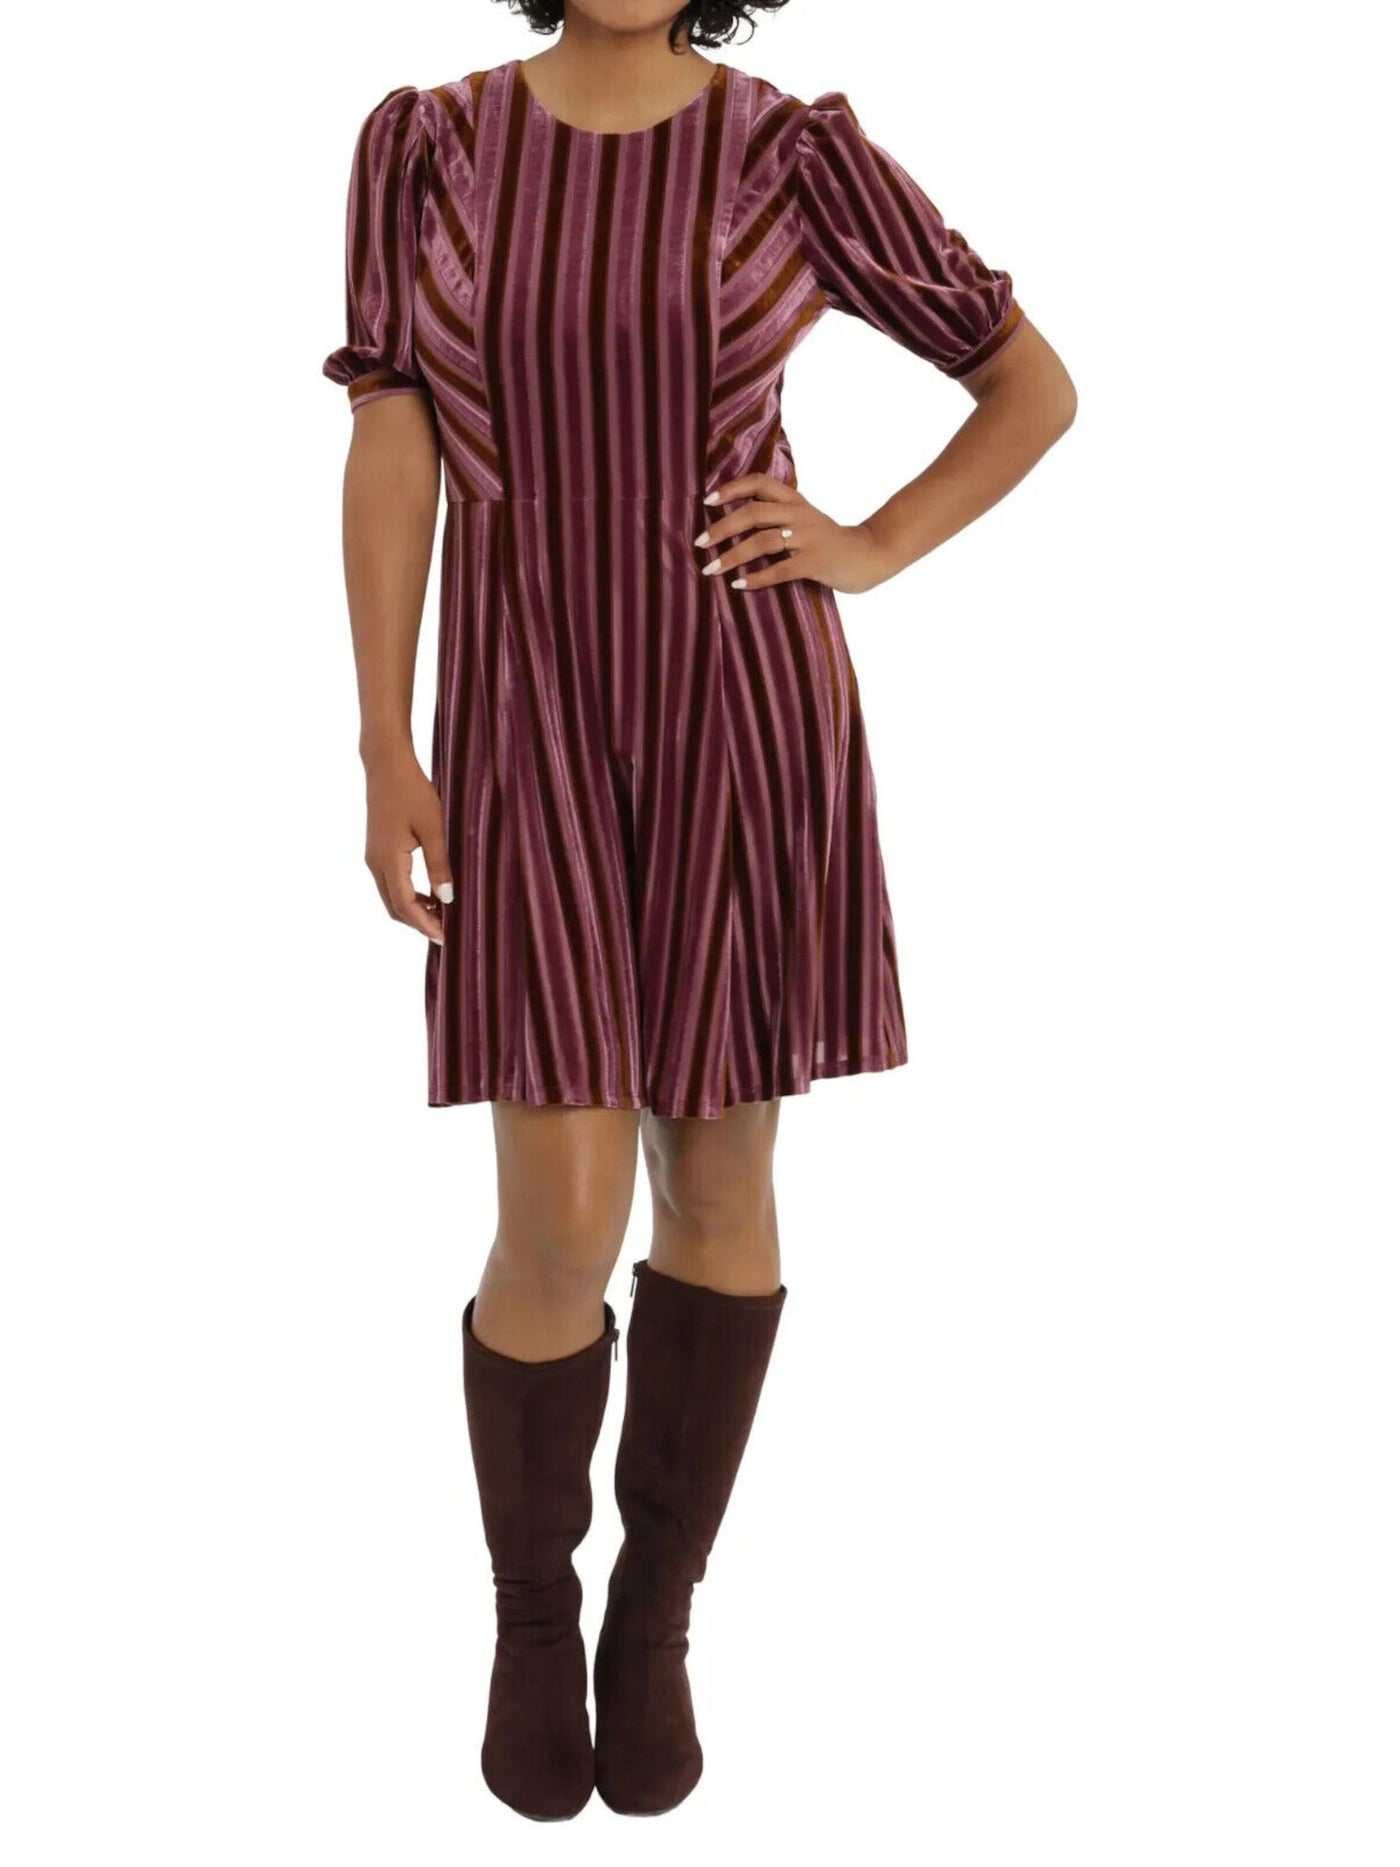 LONDON TIMES Womens Brown Stretch Zippered Lined Striped Pouf Sleeve Jewel Neck Above The Knee Party Fit + Flare Dress 6